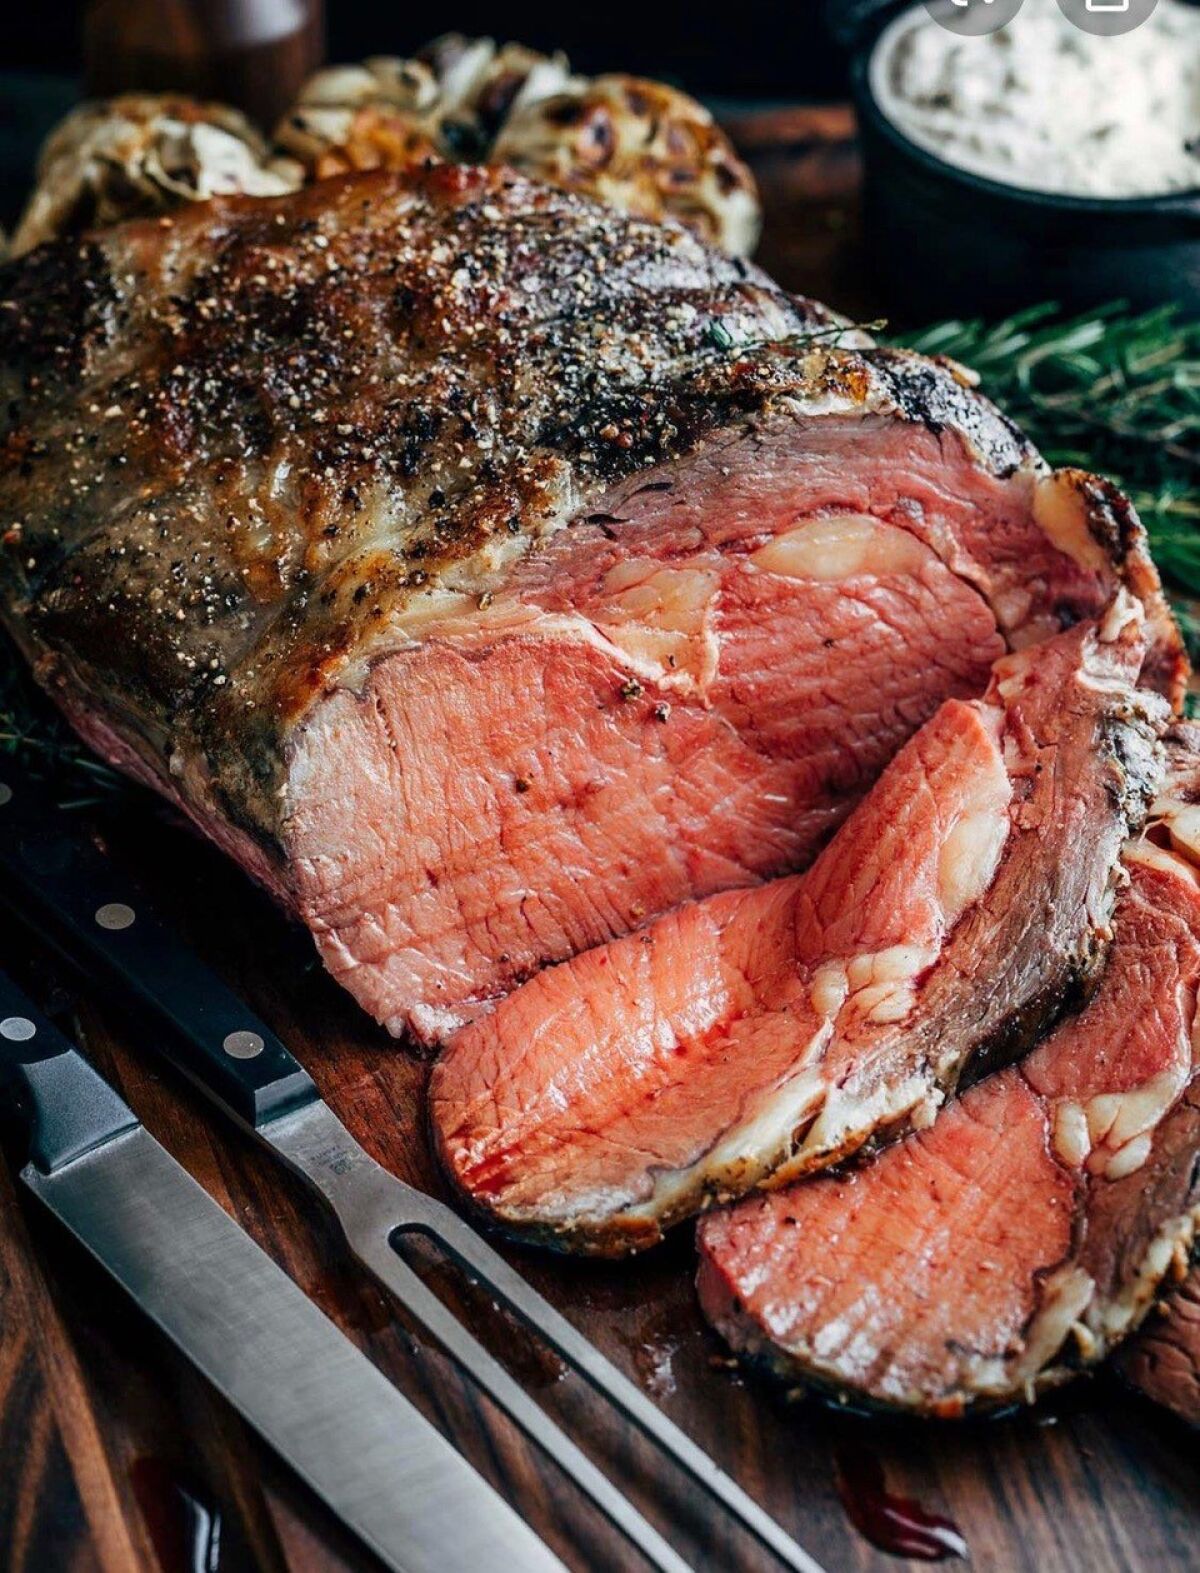 The prime rib at the Winery Restaurant & Wine Bar is one of the entrees that chef Yvon Goetz is offering for their Easter dinners that can be ordered for pickup on Sunday. Orders must be placed by Thursday.